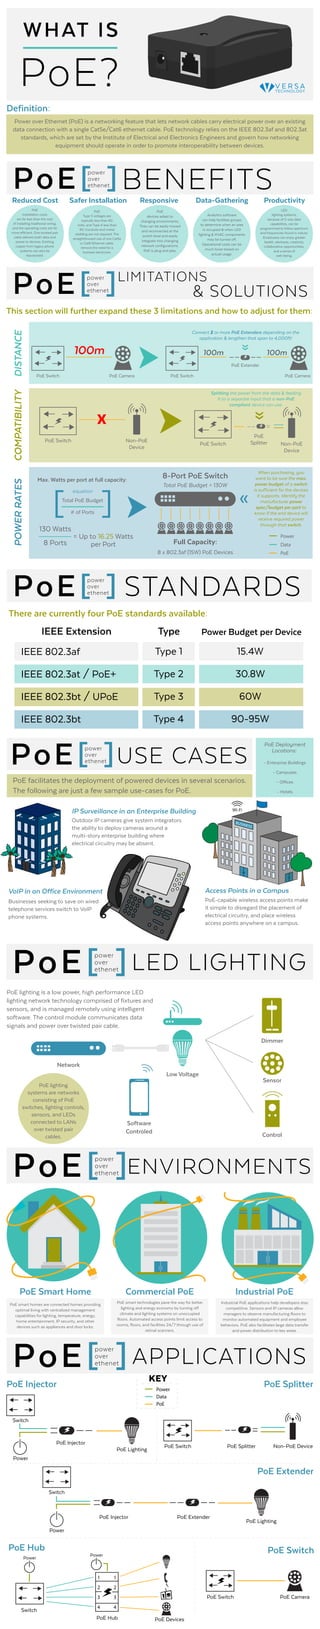 Definition:
PoE Deployment
Locations:
- Hotels
- Offices
- Enterprise Buildings
IP Surveillance in an Enterprise Building
VoIP in an Office Environment Access Points in a Campus
BUSINESS
Wi-Fi
PoE USE CASESpower
over
ethenet[ ]
PoE facilitates the deployment of powered devices in several scenarios.
The following are just a few sample use-cases for PoE.
Outdoor IP cameras give system integrators
the ability to deploy cameras around a
multi-story enterprise building where
electrical circuitry may be absent.
Businesses seeking to save on wired
telephone services switch to VoIP
phone systems.
PoE-capable wireless access points make
it simple to disregard the placement of
electrical circuitry, and place wireless
access points anywhere on a campus.
- Campuses
WHAT IS
PoE?
Power over Ethernet (PoE) is a networking feature that lets network cables carry electrical power over an existing
data connection with a single Cat5e/Cat6 ethernet cable. PoE technology relies on the IEEE 802.3af and 802.3at
standards, which are set by the Institute of Electrical and Electronics Engineers and govern how networking
equipment should operate in order to promote interoperability between devices.
There are currently four PoE standards available:
PoE LIMITATIONSpower
over
ethenet[ ]
PoE BENEFITSpower
over
ethenet[ ]
DISTANCECOMPATIBILITYPOWERRATES
100m
PoE Switch PoE Camera
100m 100m
PoE Switch PoE Camera
PoE Switch Non-PoE
Device
X
PoE Switch Non-PoE
Device
PoE
Splitter
Max. Watts per port at full capacity:
Total PoE Budget
# of Ports
130 Watts
8 Ports
= Up to 16.25 Watts
per Port
[ ]
equation
Total PoE Budget = 130W
8-Port PoE Switch
Power
Data
PoE
Full Capacity:
8 x 802.3af (15W) PoE Devices
PoE Extender
Connect 2 or more PoE Extenders depending on the
application & lengthen that span to 4,000ft!
PoE STANDARDSpower
over
ethenet[ ]
IEEE 802.3af
IEEE 802.3at / PoE+
IEEE 802.3bt / UPoE
IEEE 802.3bt
Type 1
Type 2
Type 3
Type 4
15.4W
30.8W
60W
90-95W
IEEE Extension Type Power Budget per Device
Dimmer
Sensor
Control
Low Voltage
Network
Software
Controled
PoE LED LIGHTINGpower
over
ethenet[ ]
PoE ENVIRONMENTS
power
over
ethenet[ ]
PoE APPLICATIONSpower
over
ethenet[ ]
||||| |||||
|||||
PoE Switch
PoE Switch
PoE Injector
PoE Extender
PoE Hub
PoE Splitter
Switch
Power
PoE Lighting
PoE Lighting
Non-PoE Device
PoE Camera
PoE Injector
Switch
Power
Switch
Power
Power
Data
PoE
Power
1
2
3
4
1
2
3
4
PoE Devices
PoE
installation costs
are far less than the cost
of installing traditional wiring,
and the operating costs are far
more efficient. One twisted pair
cable delivers both data and
power to devices. Existing
copper from legacy phone
systems can also be
repurposed.
Reduced Cost Safer Installation Responsive Data-Gathering Productivity
PoE
Type 3 voltages are
typically less than 60
volts, and Type 4 less than
90. Conduits and metal
cladding are not required. The
straightforward use of one Cat5e
or Cat6 Ethernet cable,
remove the need for a
licensed electrician.
PoE
devices adapt to
changing environments.
They can be easily moved
and reconnected at the
switch level and easily
integrate into changing
network configurations.
PoE is plug and play.
Analytics software
can help facilities groups
to determine when an area
is occupied & when LED
lighting & HVAC components
may be turned off.
Operational costs can be
much lower based on
actual usage.
LED
lighting systems,
because of 2-way data
capabilities, can be
programmed to follow spectrum
and frequencies found in nature.
Employees can enjoy greater
health, alertness, creativity,
collaborative opportunities,
and a sense of
well-being.
PoE Smart Home Commercial PoE Industrial PoE
PoE smart homes are connected homes providing
optimal living with centralized management
capabilities for lighting, temperature, energy,
home entertainment, IP security, and other
devices such as appliances and door locks.
PoE smart technologies pave the way for better
lighting and energy economy by turning off
climate and lighting systems on unoccupied
floors. Automated access points limit access to
rooms, floors, and facilities 24/7 through use of
retinal scanners.
Industrial PoE applications help developers stay
competitive. Sensors and IP cameras allow
managers to observe manufacturing floors to
monitor automated equipment and employee
behaviors. PoE also facilitates large data transfer
and power distribution to key areas.
PoE lighting is a low power, high performance LED
lighting network technology comprised of fixtures and
sensors, and is managed remotely using intelligent
software. The control module communicates data
signals and power over twisted pair cable.
PoE Injector PoE Splitter
PoE Extender
PoE Hub PoE Switch
KEY
& SOLUTIONS
This section will further expand these 3 limitations and how to adjust for them:
Splitting the power from the data & feeding
it to a separate input that a non-PoE
compliant device can use.
When purchasing, you
want to be sure the max.
power budget of a switch
is sufficient for the devices
it supports. Identify the
manufacturer power
spec/budget per port to
know if the end device will
receive required power
through that switch.
PoE lighting
systems are networks
consisting of PoE
switches, lighting controls,
sensors, and LEDs
connected to LANs
over twisted pair
cables.
 